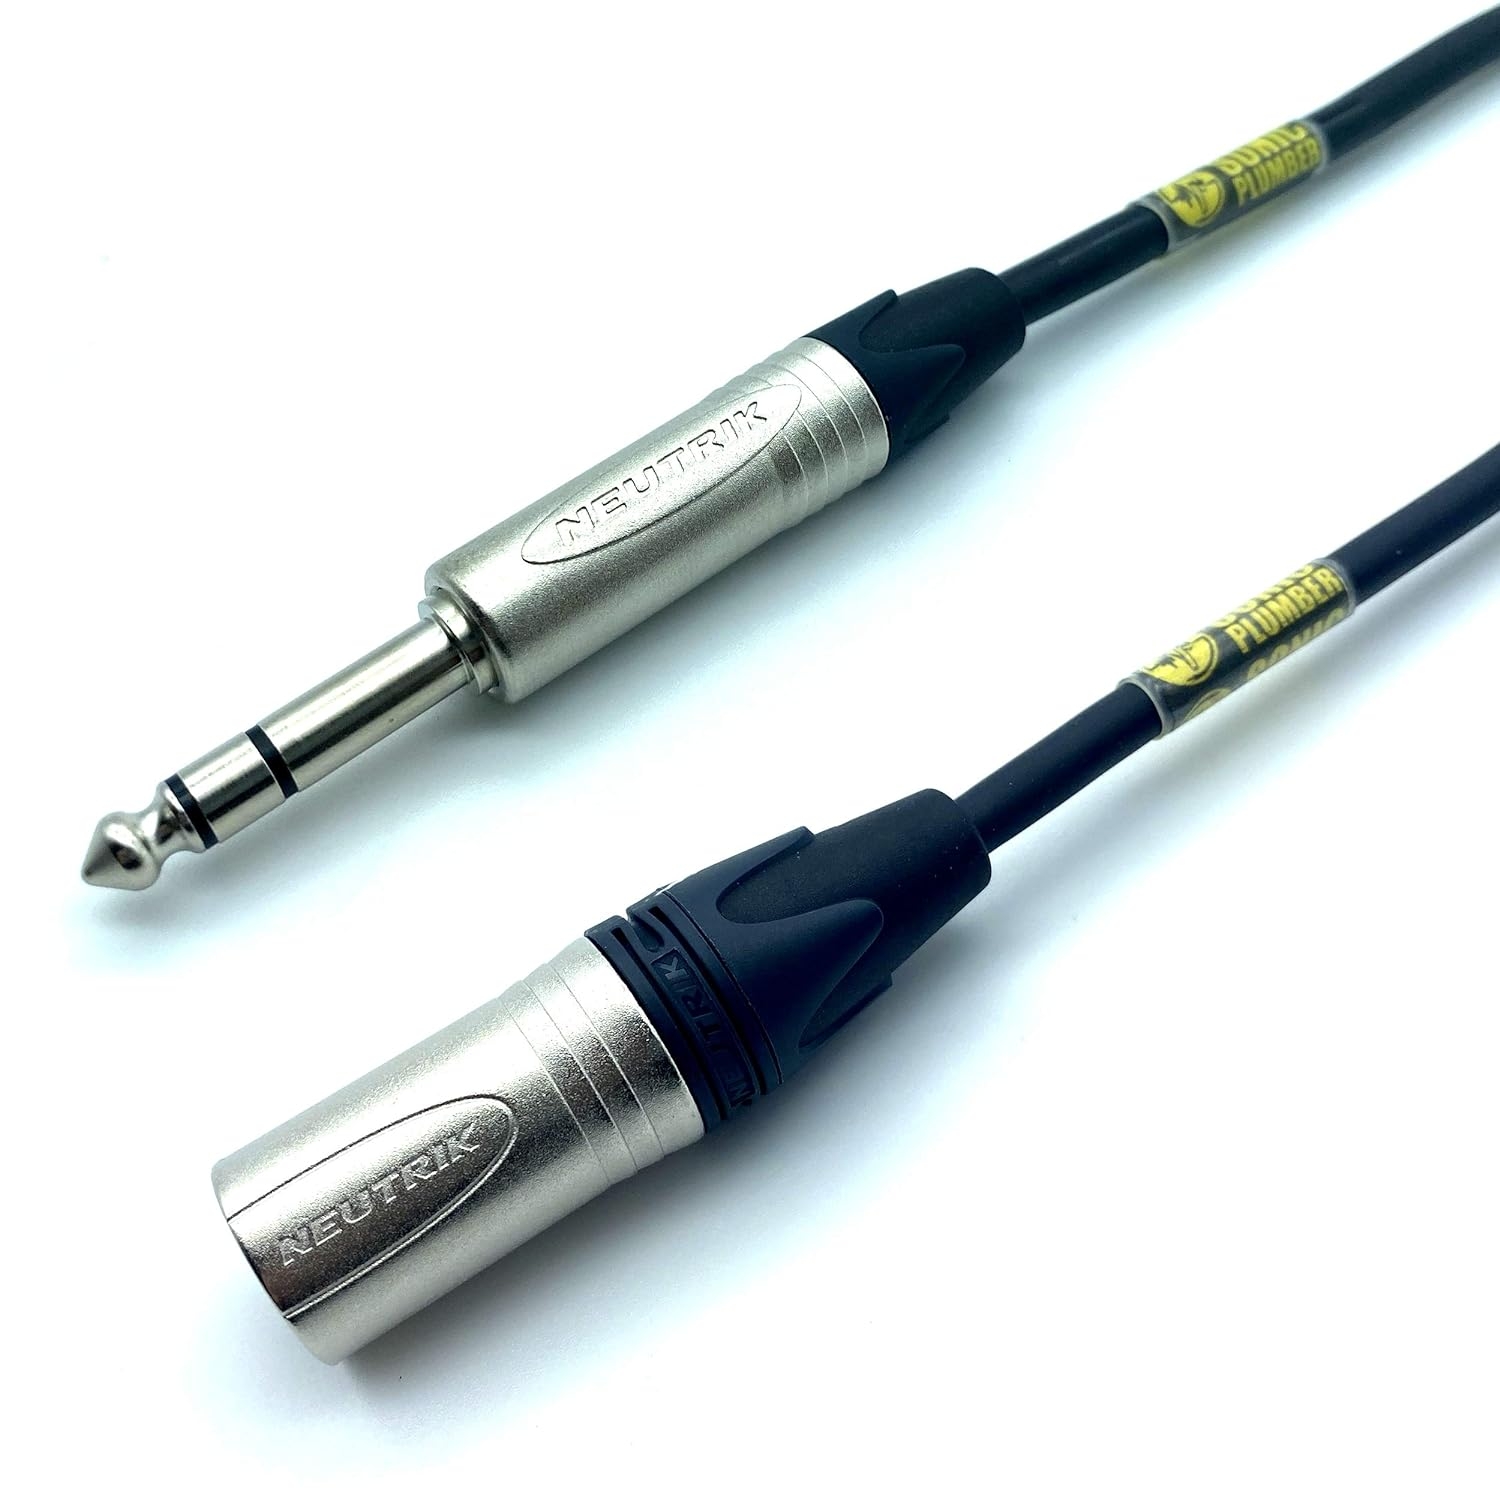 Sonic Plumber Neutrik TRS Jack to XLR Male Cable | 6.35mm 1/4 for Monitor to keyboard XLR input (3 meter)